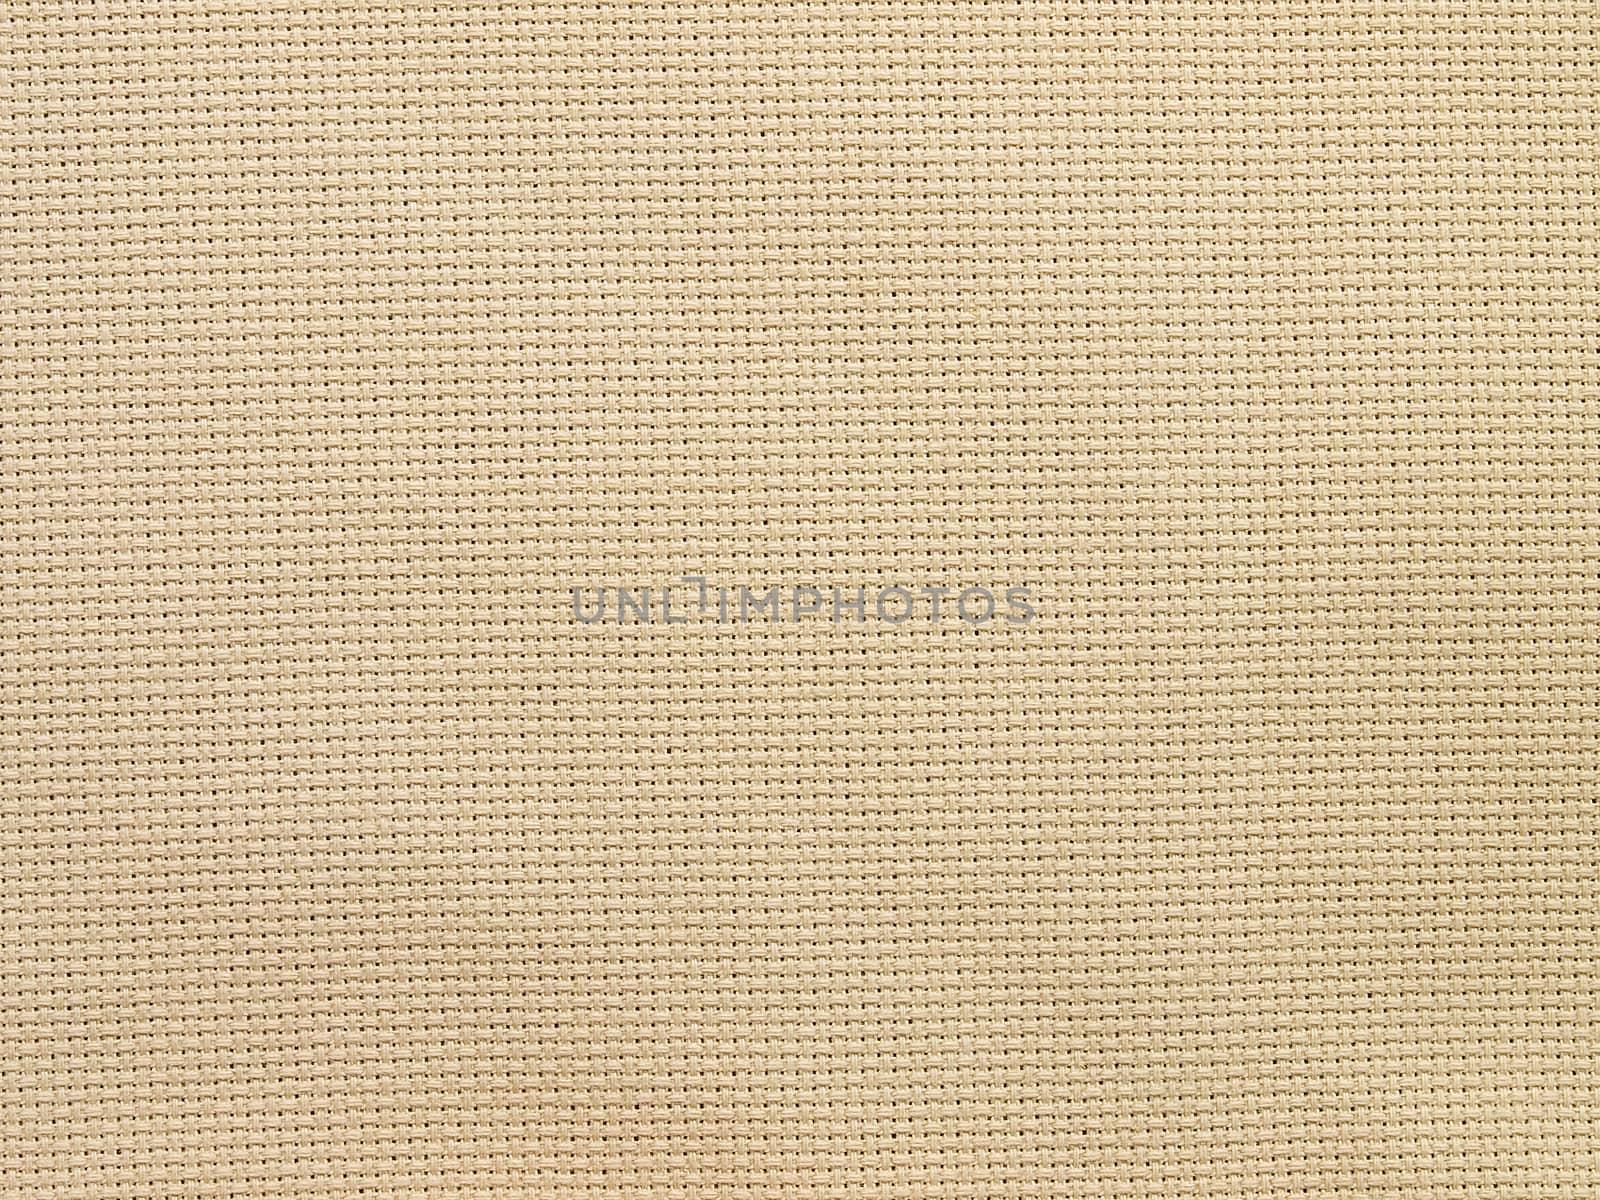 High resolution image of linen background material. Small scale.